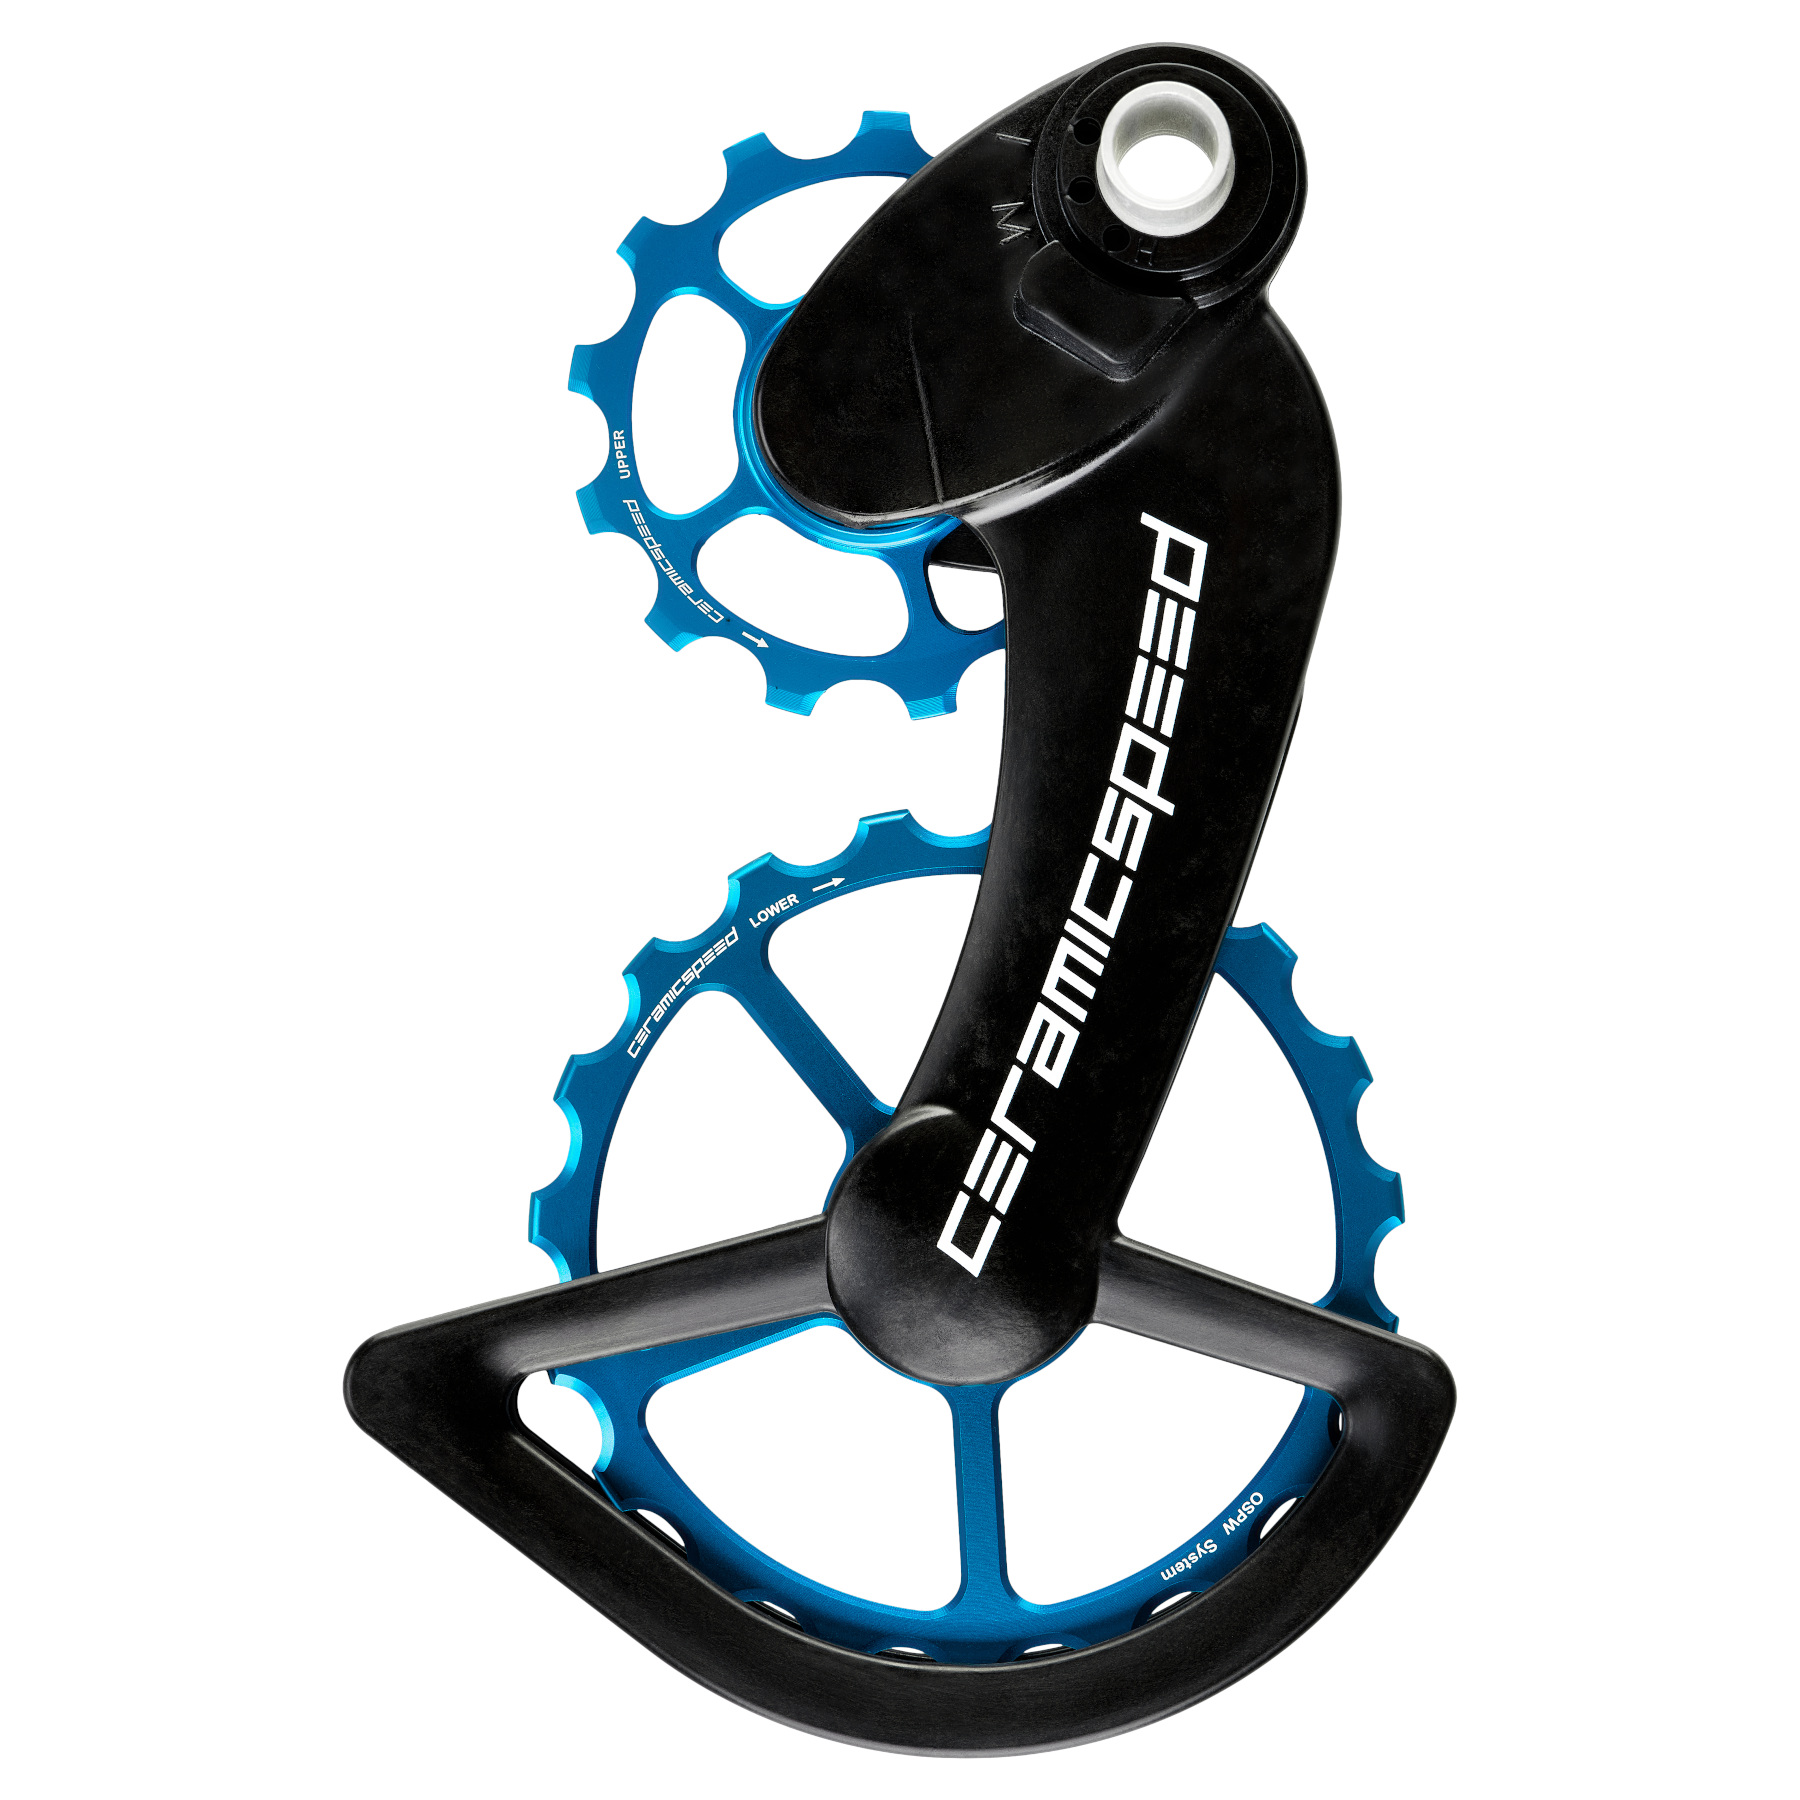 Picture of CeramicSpeed OSPW Derailleur Pulley System - for Campagnolo EPS 12s | 13/19 Teeth - blue